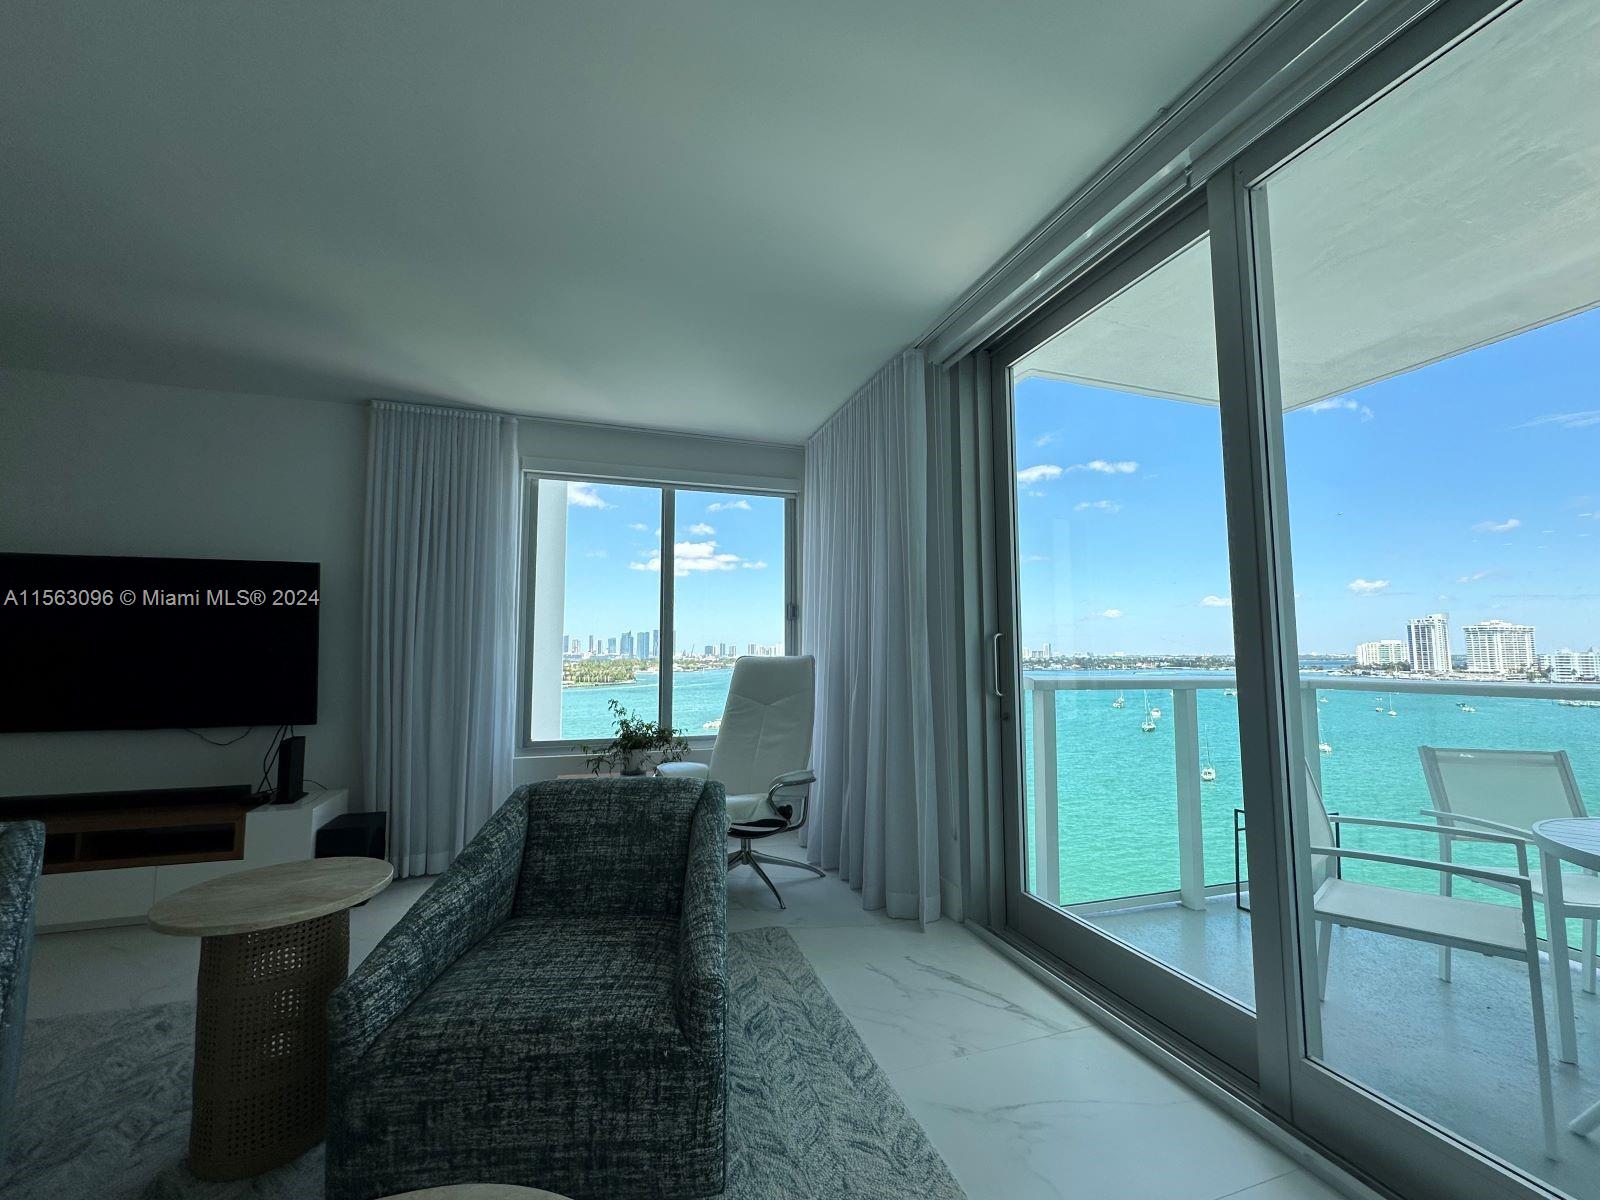 COMPLETELY RENOVATED and MODERN, 1BR and 1.5BA unit has Breathtaking Bay and Skyline Views in the heart of South Beach. This FURNISHED unit has high-end finishes, top-of-the-line appliances, and an open kitchen with an in-unit Washer and Dryer. 24-Hr Concierge and Security. Rent Includes Cable, Internet, Hot Water, and Trash Removal. 

The Mirador 1000 is a full-amenity building with a newly renovated pool deck. It is within walking distance of Whole Foods, Walgreens, Restaurants, Lincoln Rd, and Ocean Drive. It is within 15 minutes of Downtown Miami, MDC Arena, Museum Park, MIA, the Design District, and Wynwood. The unit is available from May 15 to November 30, 2024. It is a Waterview Oasis. You do not want to miss out on this unit. CALL TODAY for YOUR Private Showing.